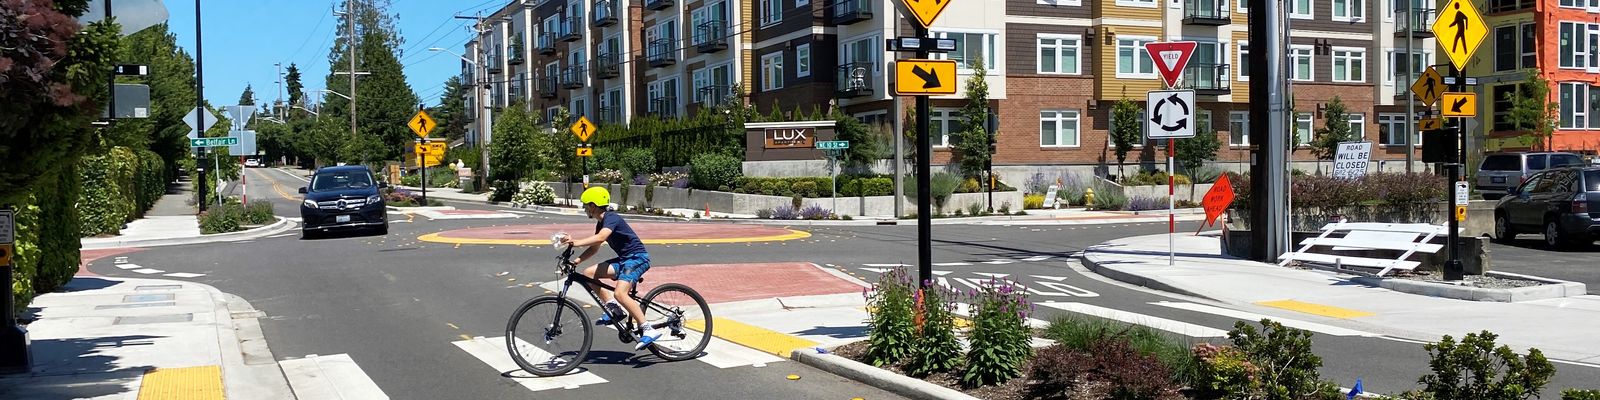 Image of bicyclist in roundabout crosswalk